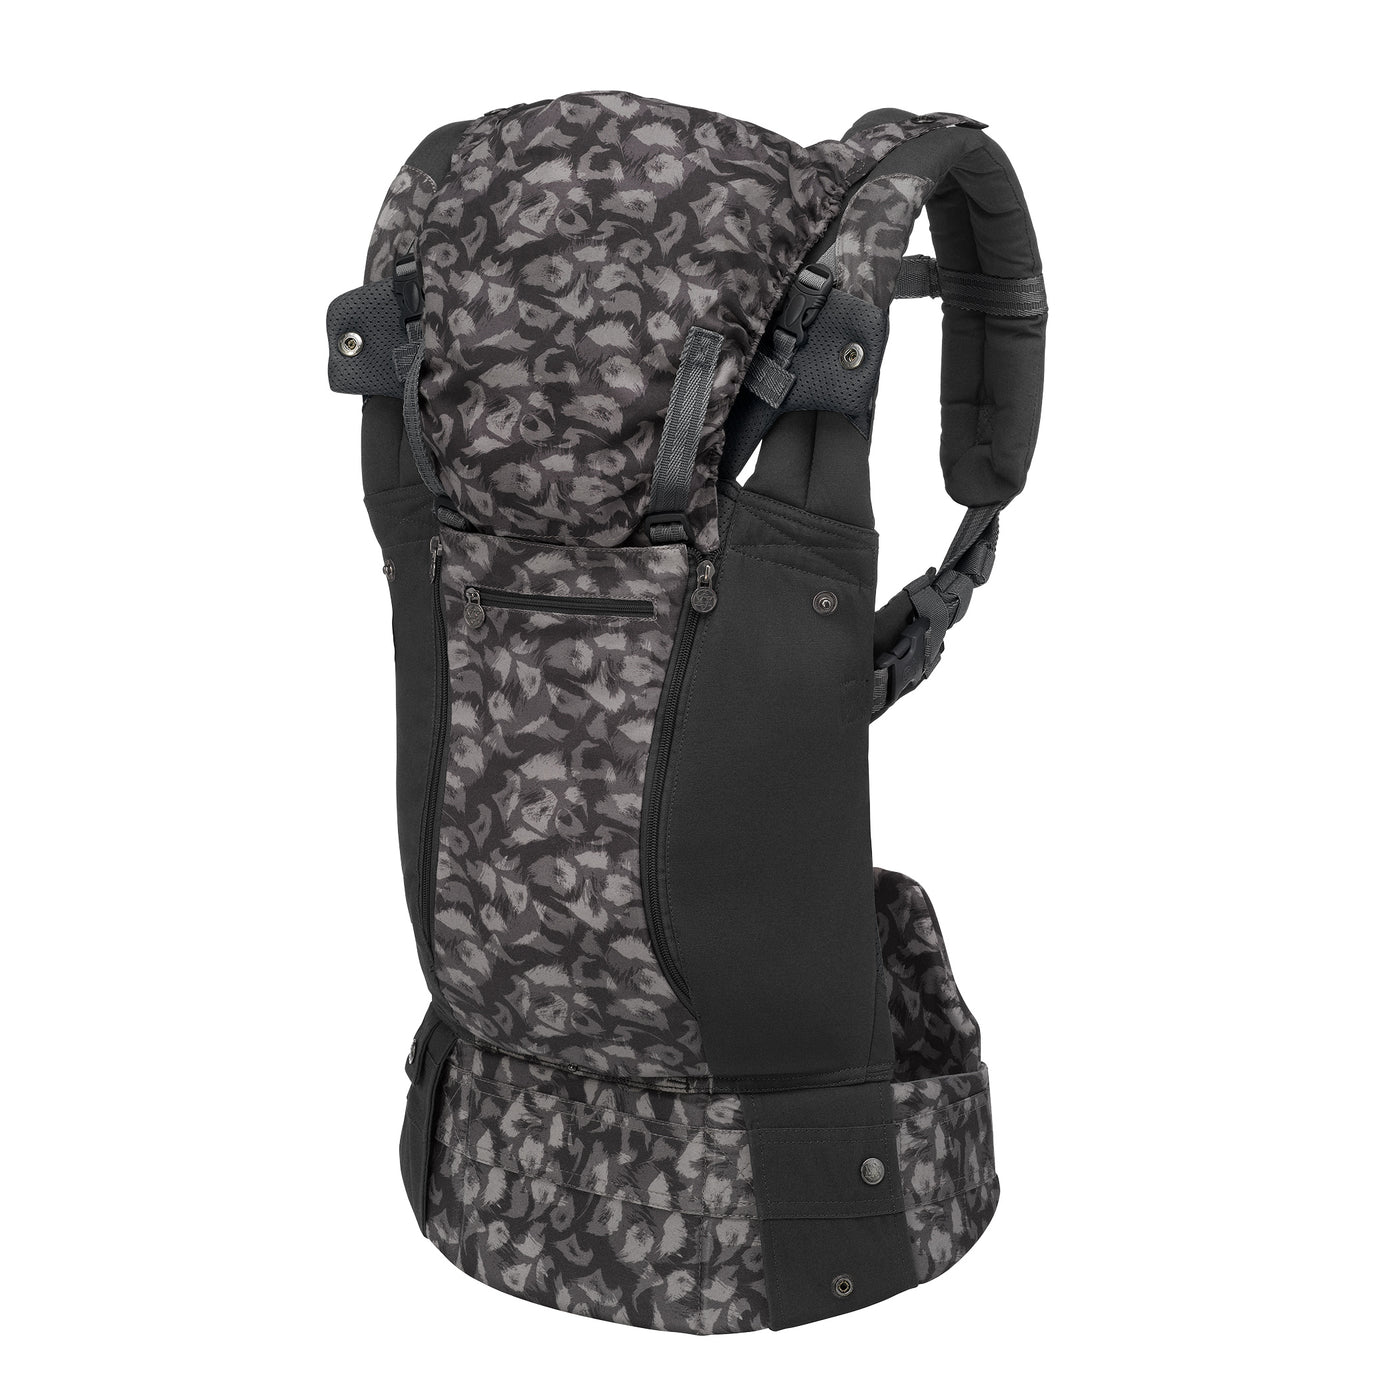 COMPLETE All Seasons Baby Carrier - Twilight Leopard